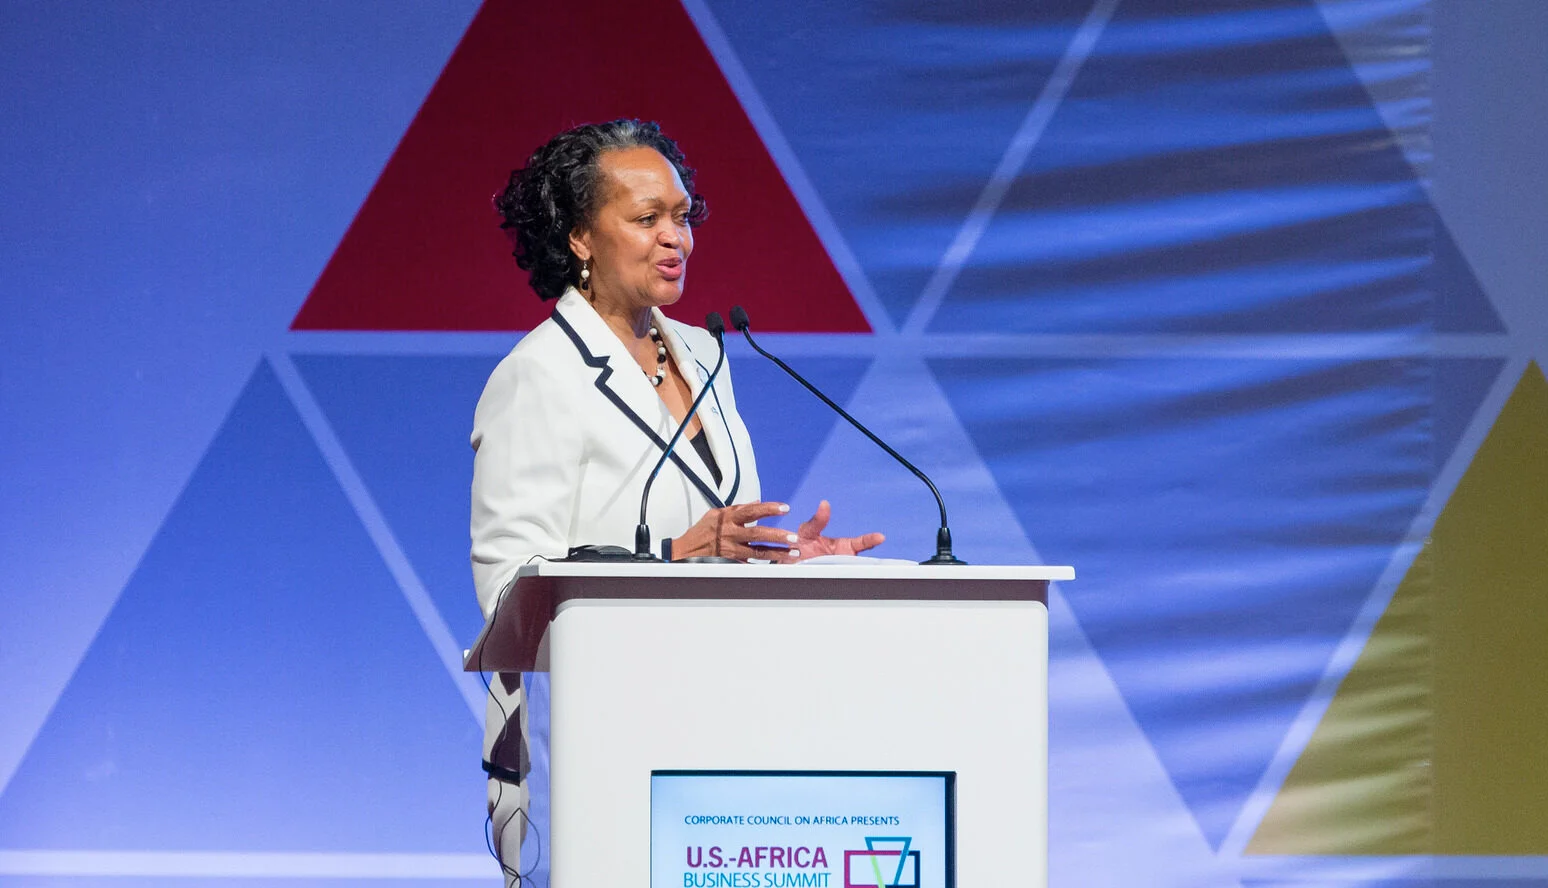 President of the Corporate Council on Africa (CCA), Florizelle Liser